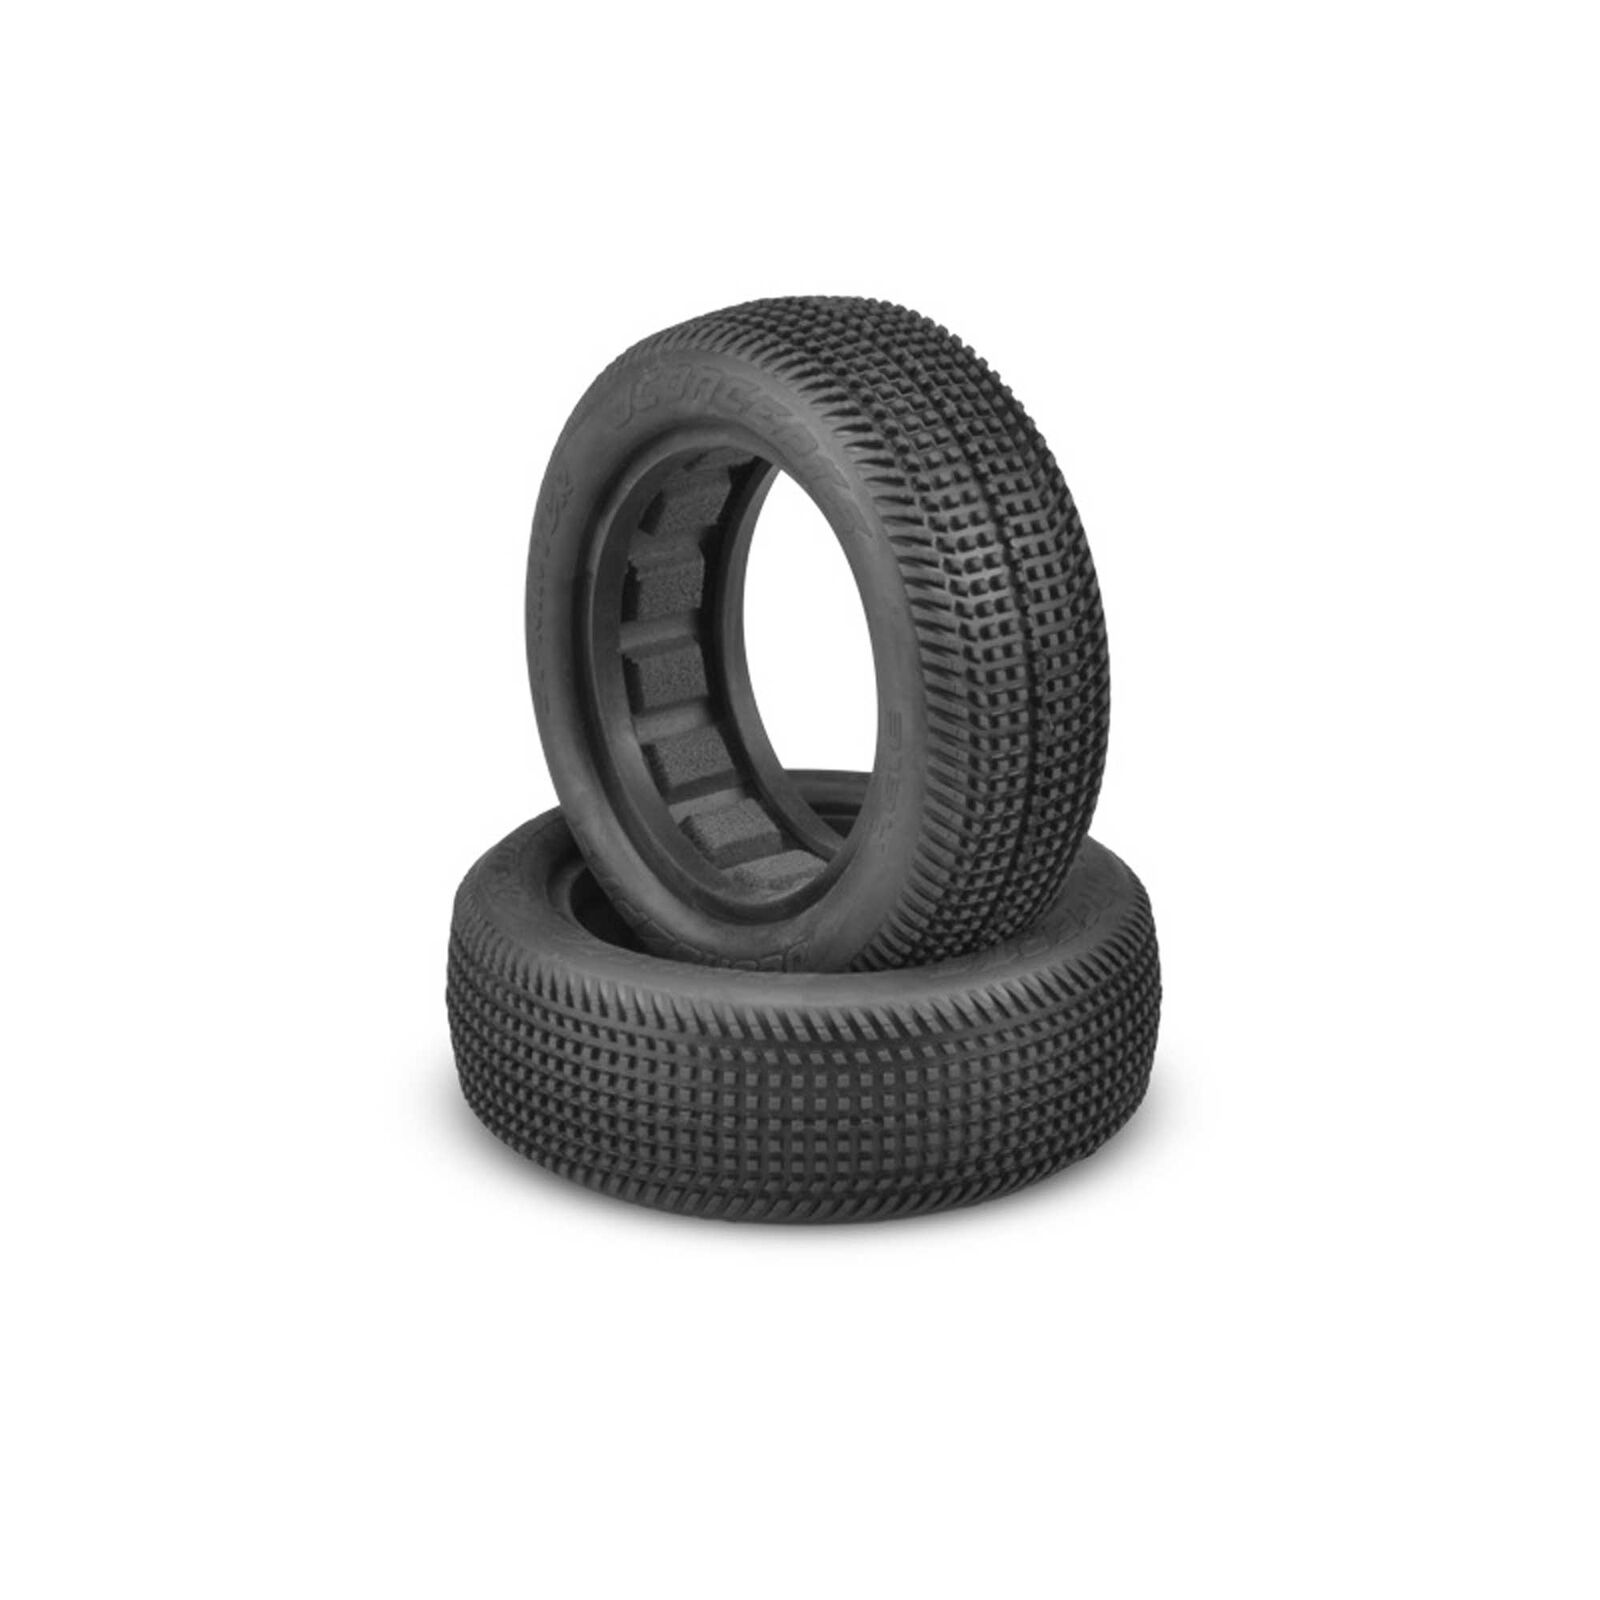 1/10 Sprinter 2.2” Front Buggy Tires and Inserts, R2 Compound (2)